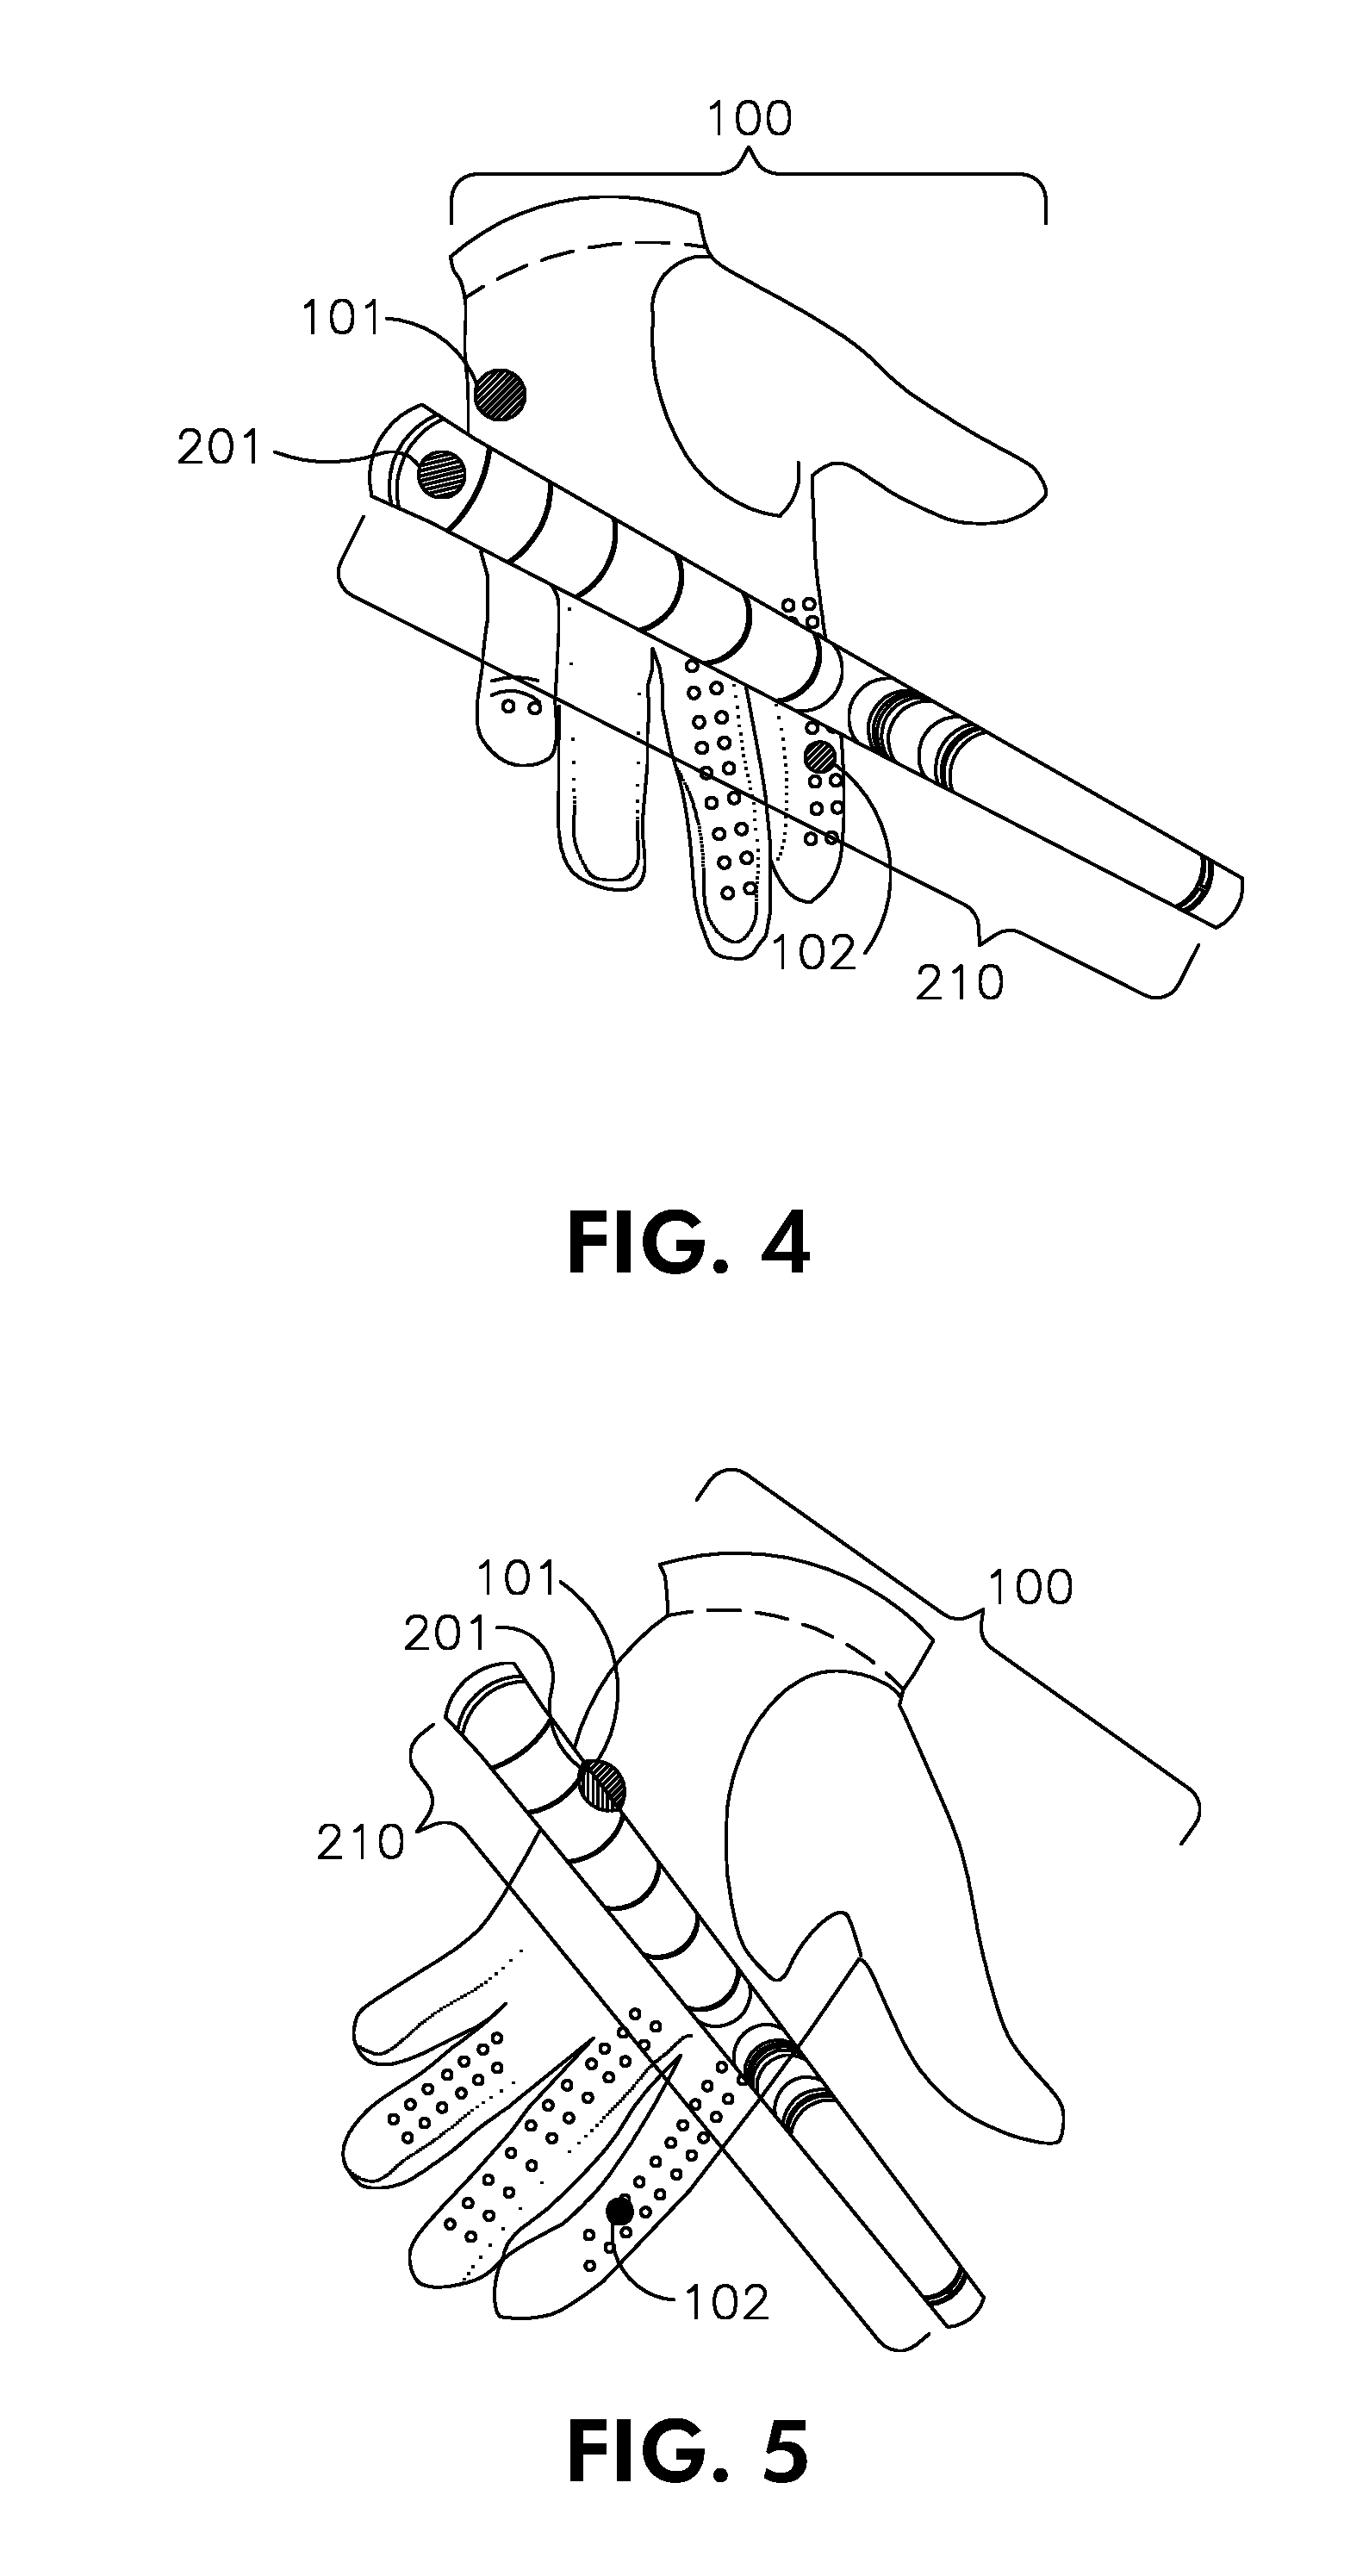 Apparatus and method for assisting a golfer to properly grip a golf club